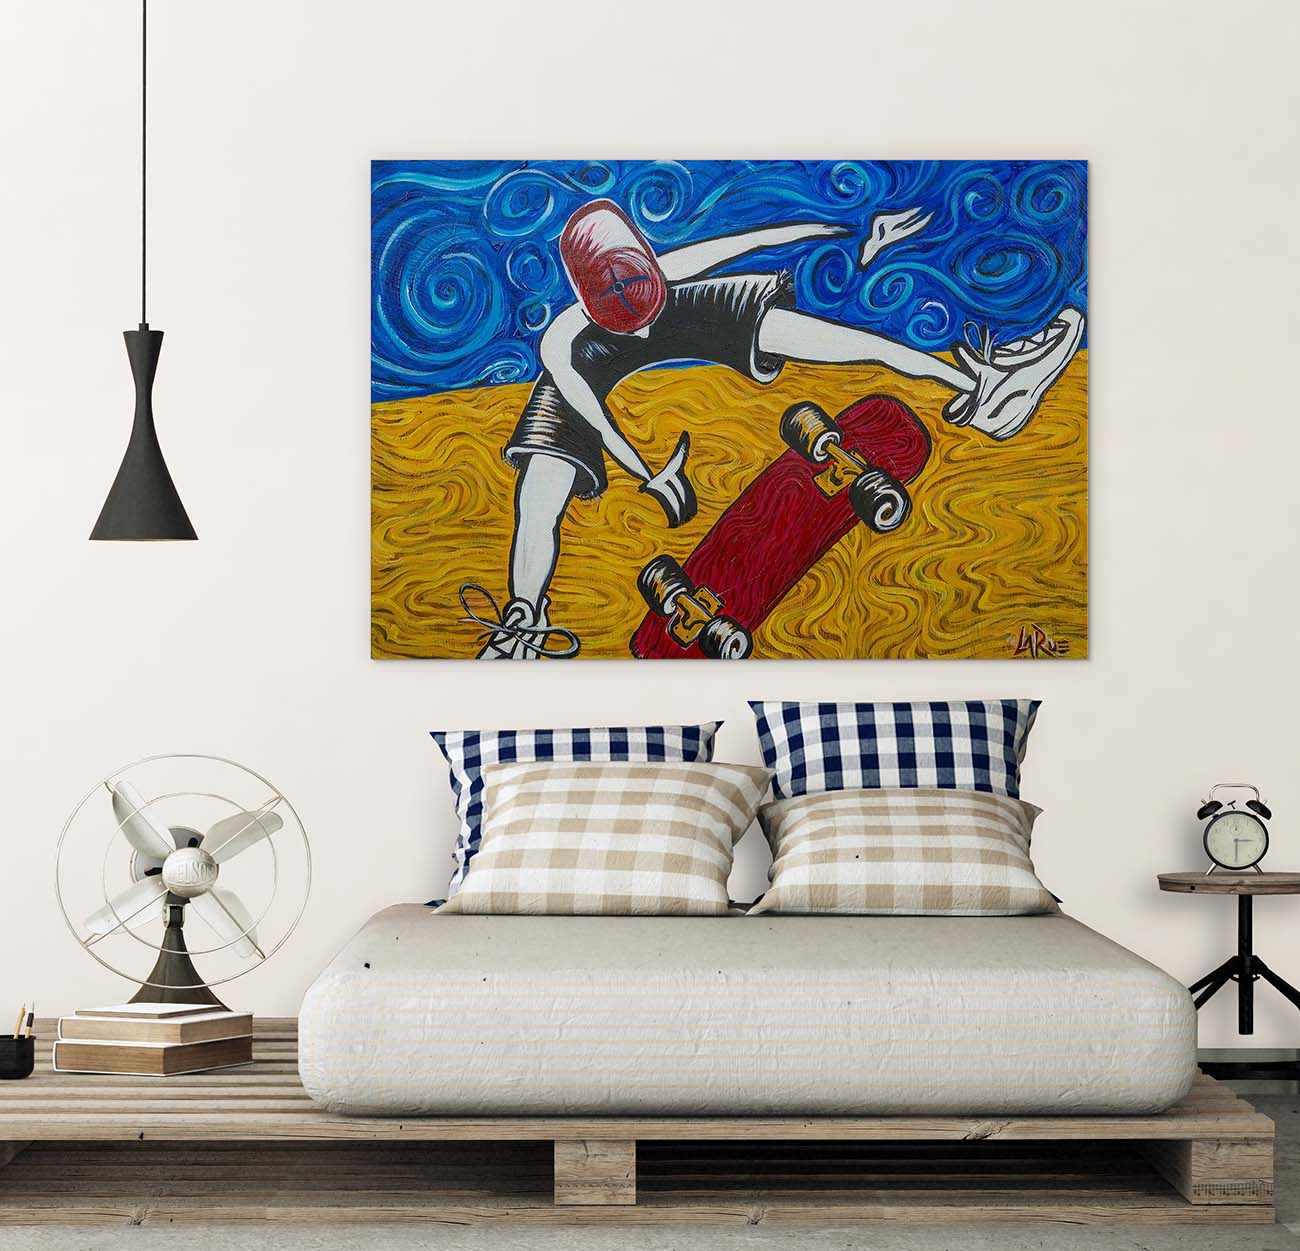 Van Gogh's Half Pipe canvas painting by Doug LaRue on a wall over a bed